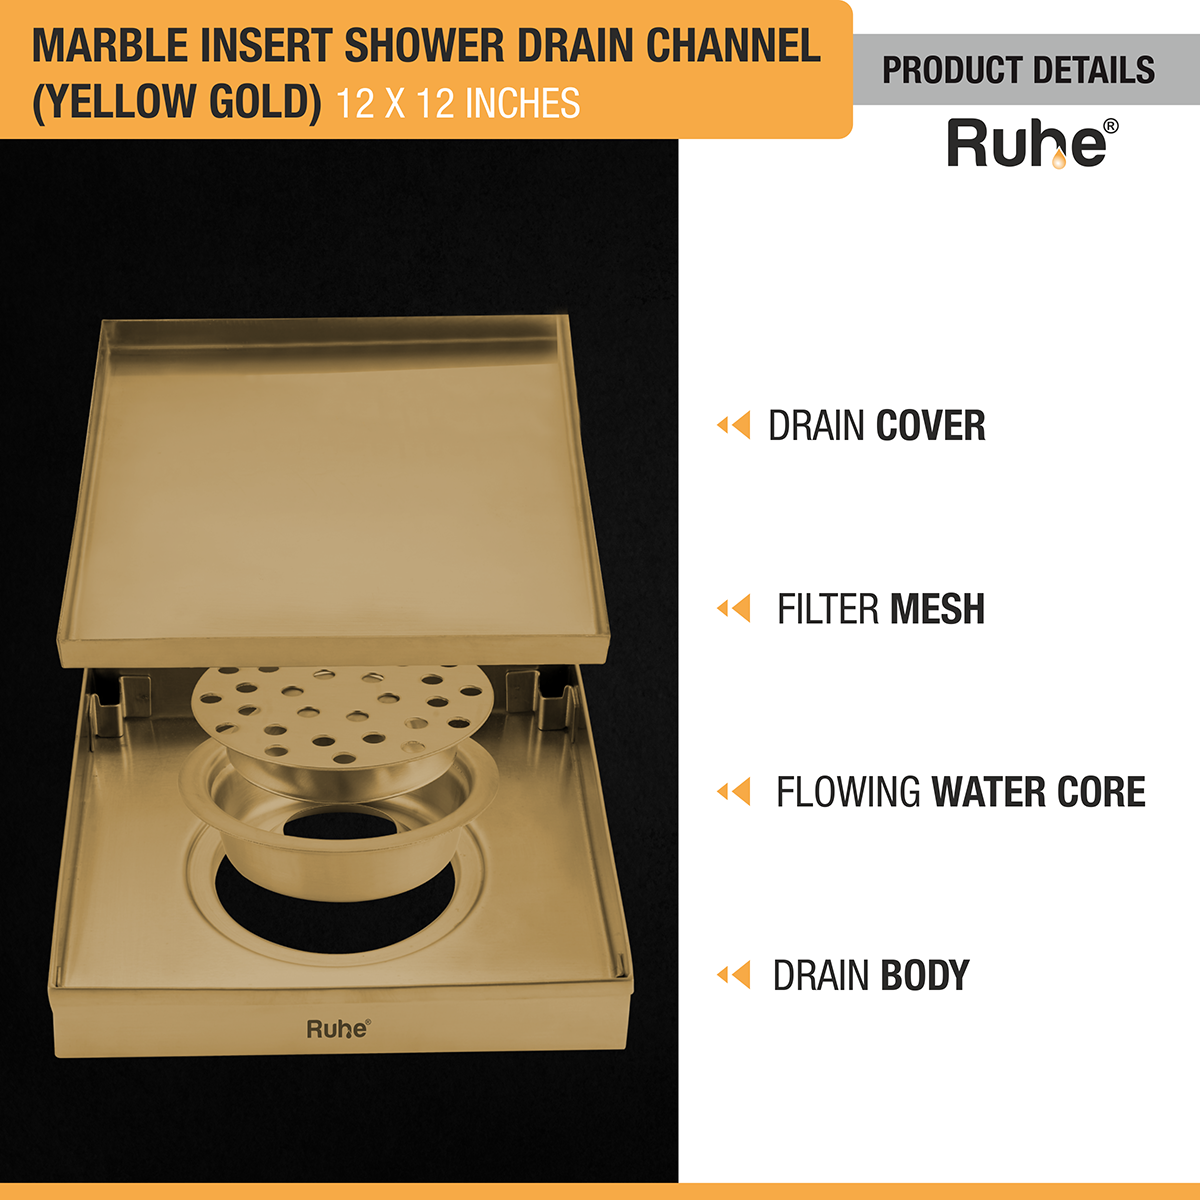 Marble Insert Shower Drain Channel (12 x 12 Inches) YELLOW GOLD PVD Coated with drain cover, filter mesh, drain body